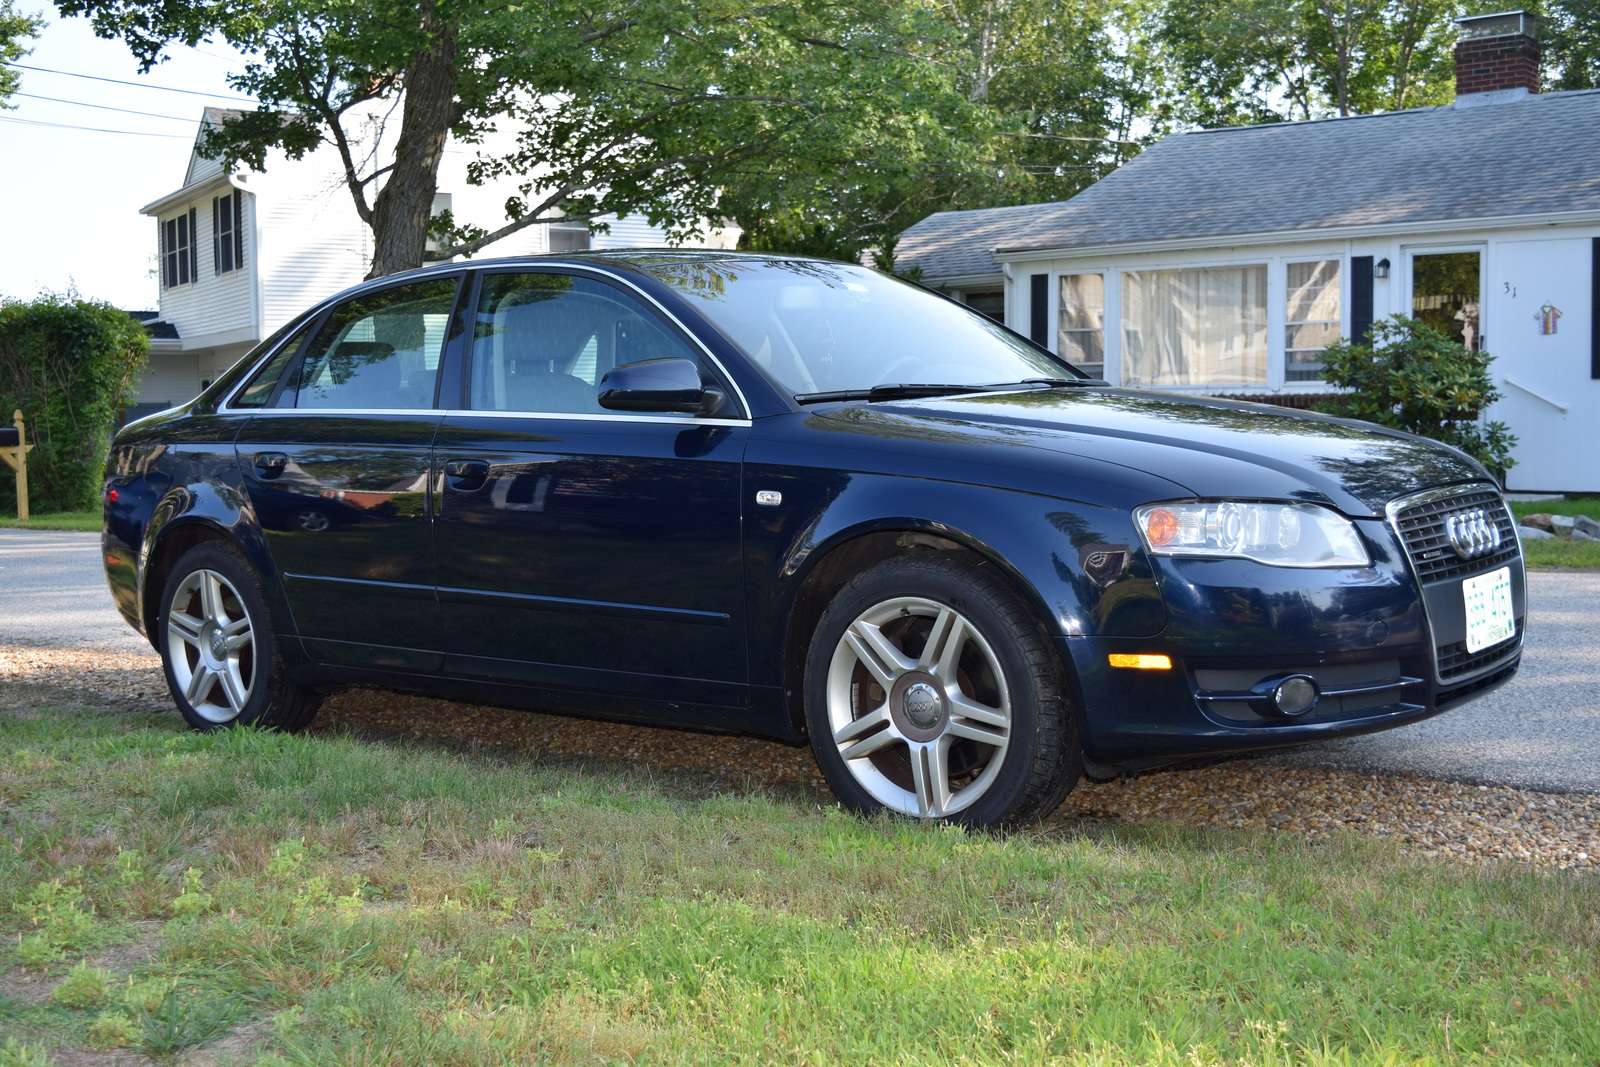 2006 Audi A4: Prices, Reviews & Pictures - CarGurus